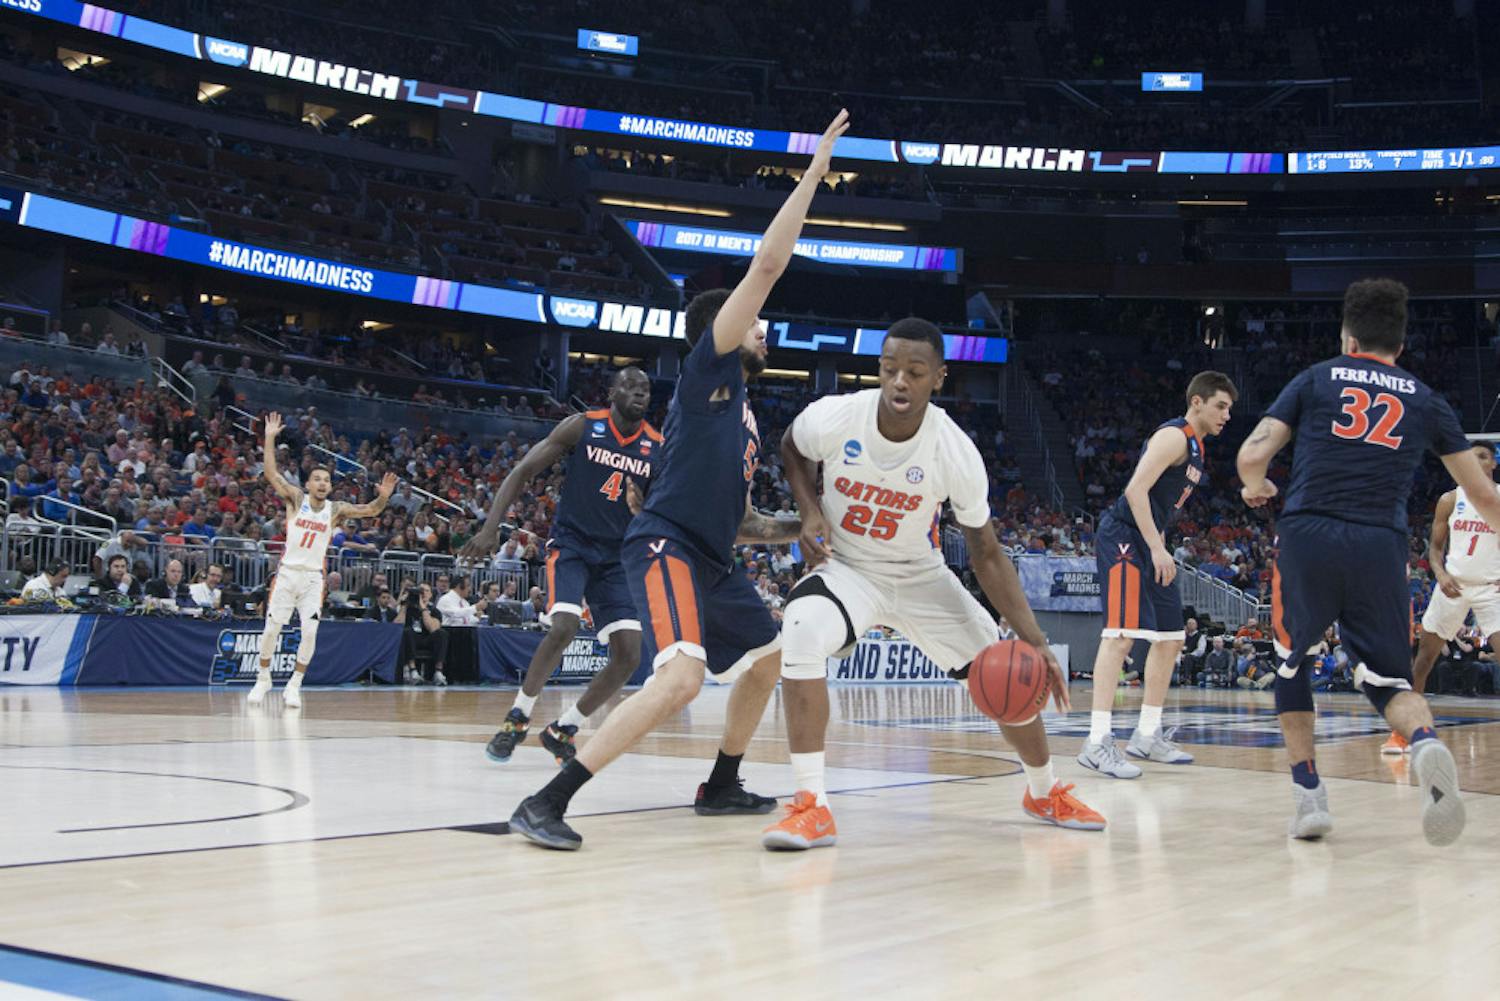 Keith Stone dribbles towards the basket during Florida's 65-39 second-round win against Virginia in the NCAA Tournament on March 18, 2017.